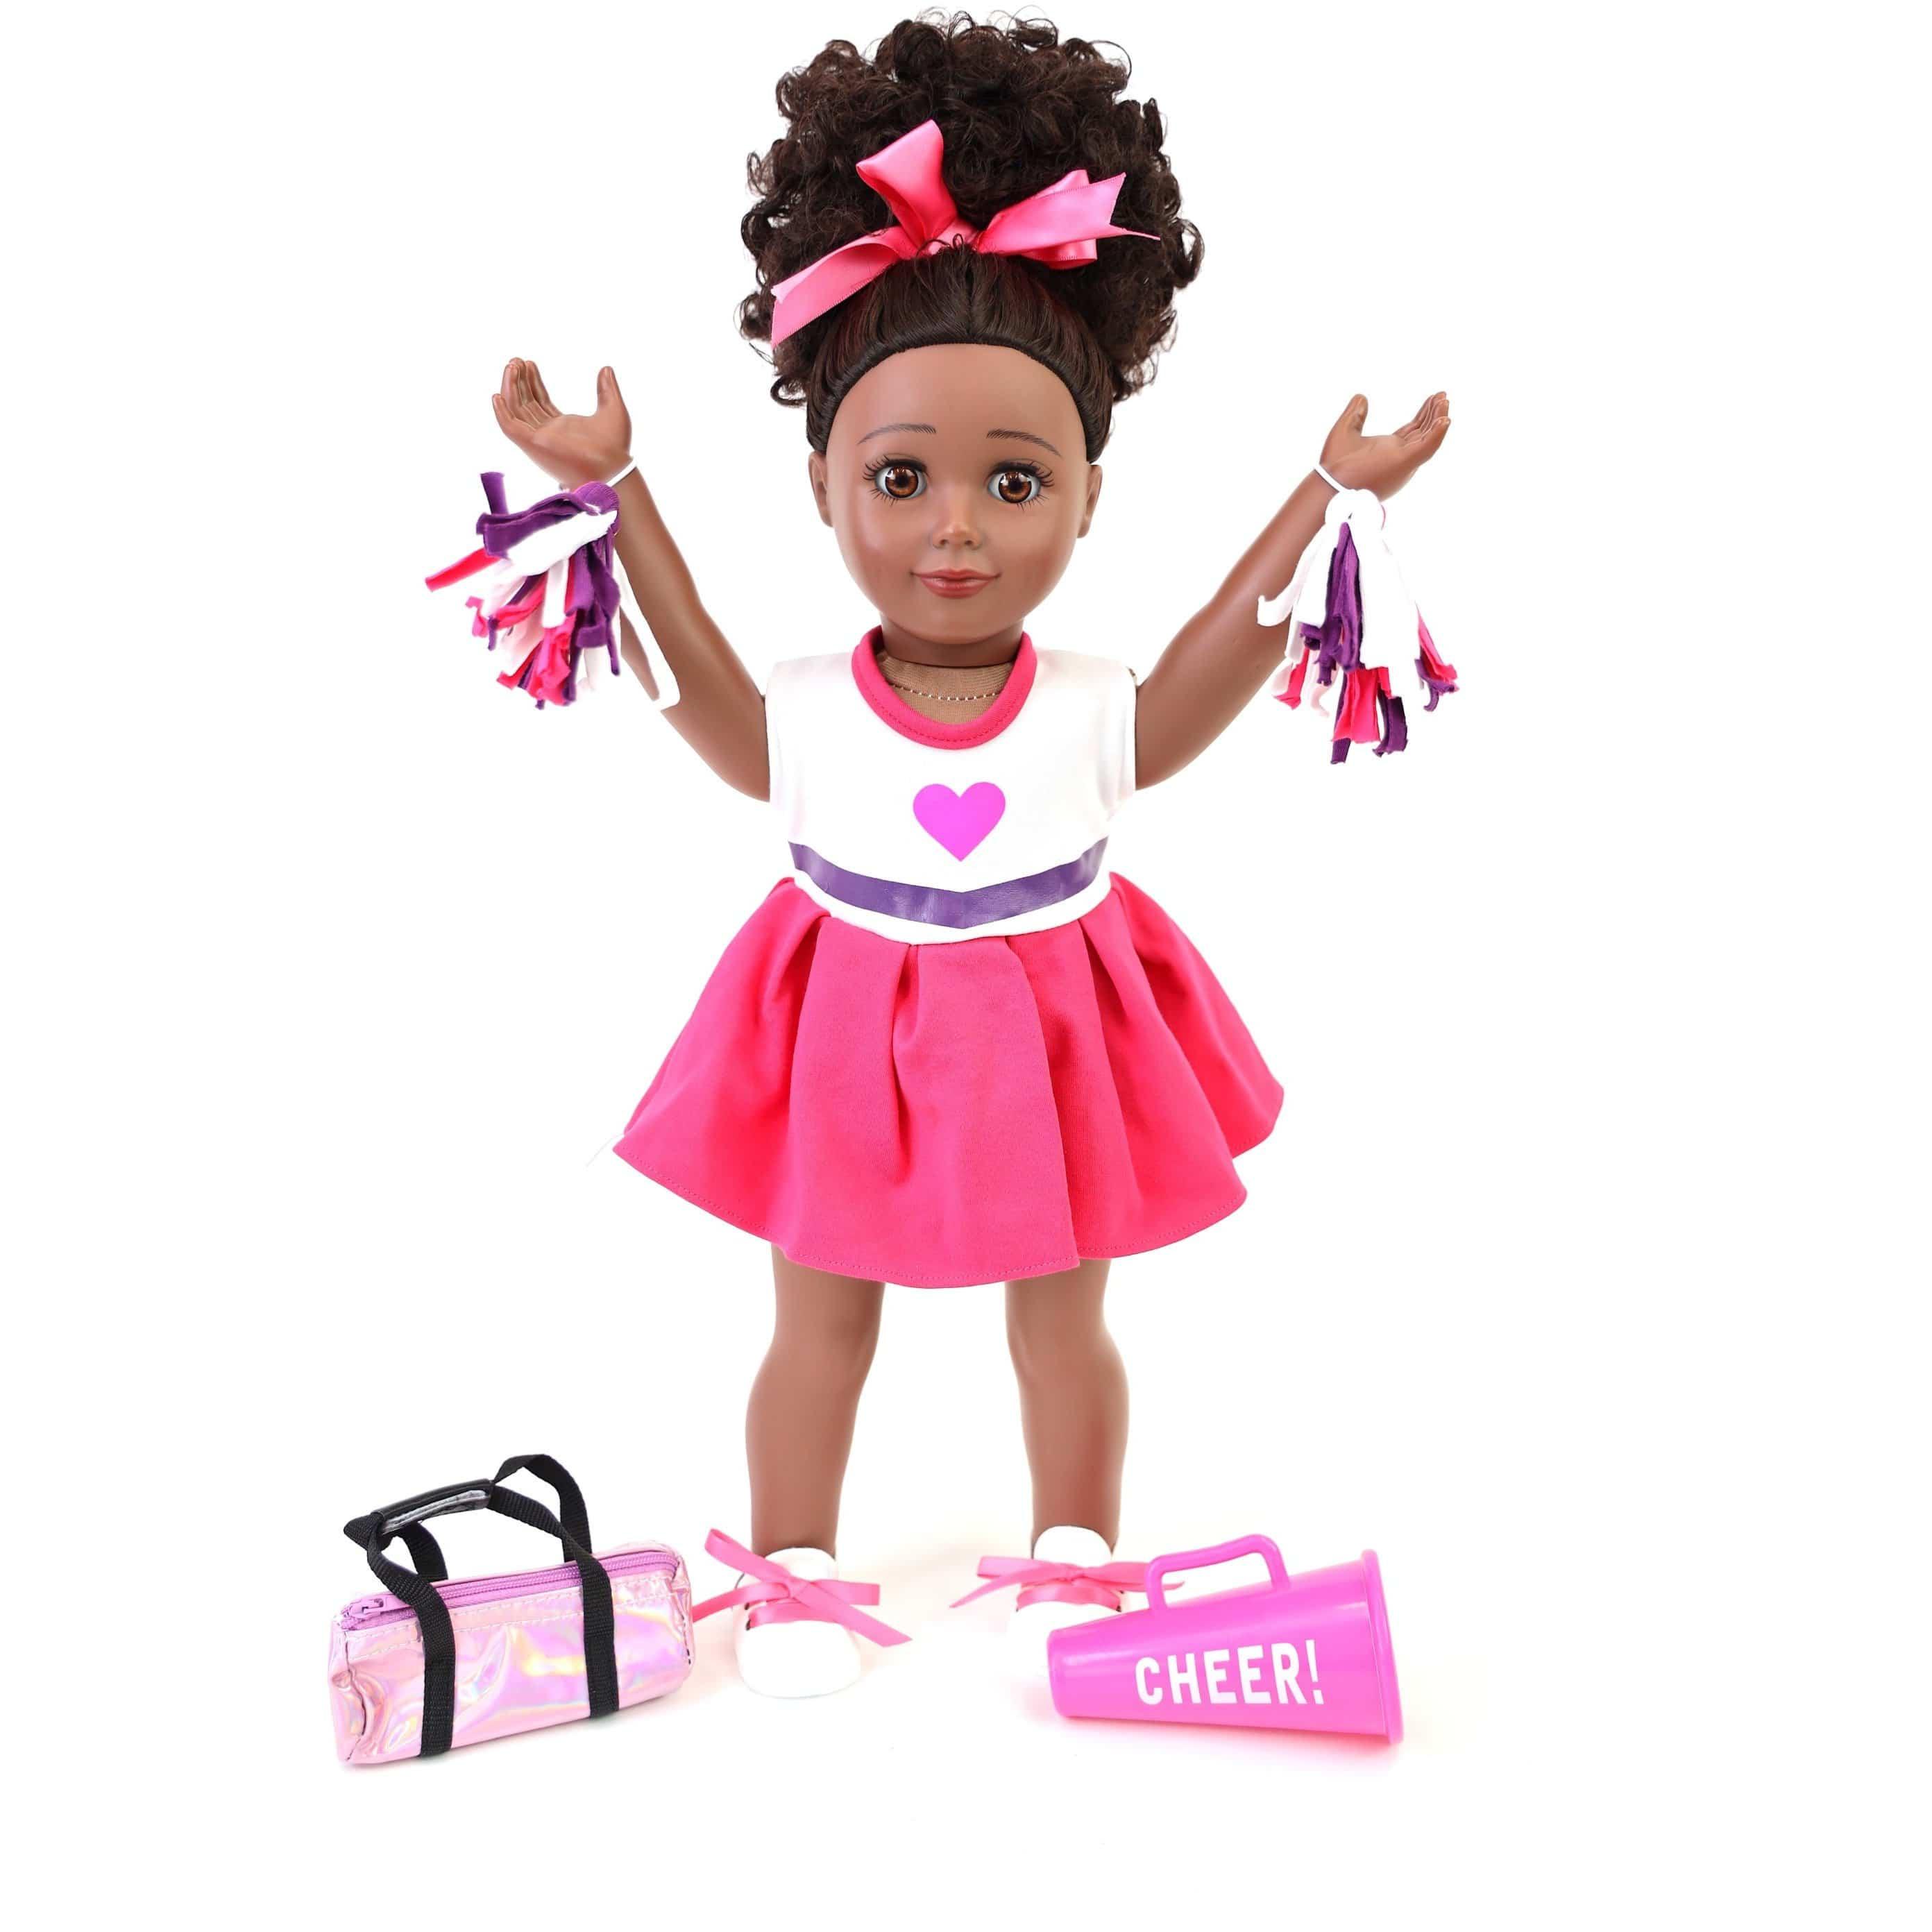 DELUXE Custom Cheerleader Uniform Set for 18 Doll Such as the